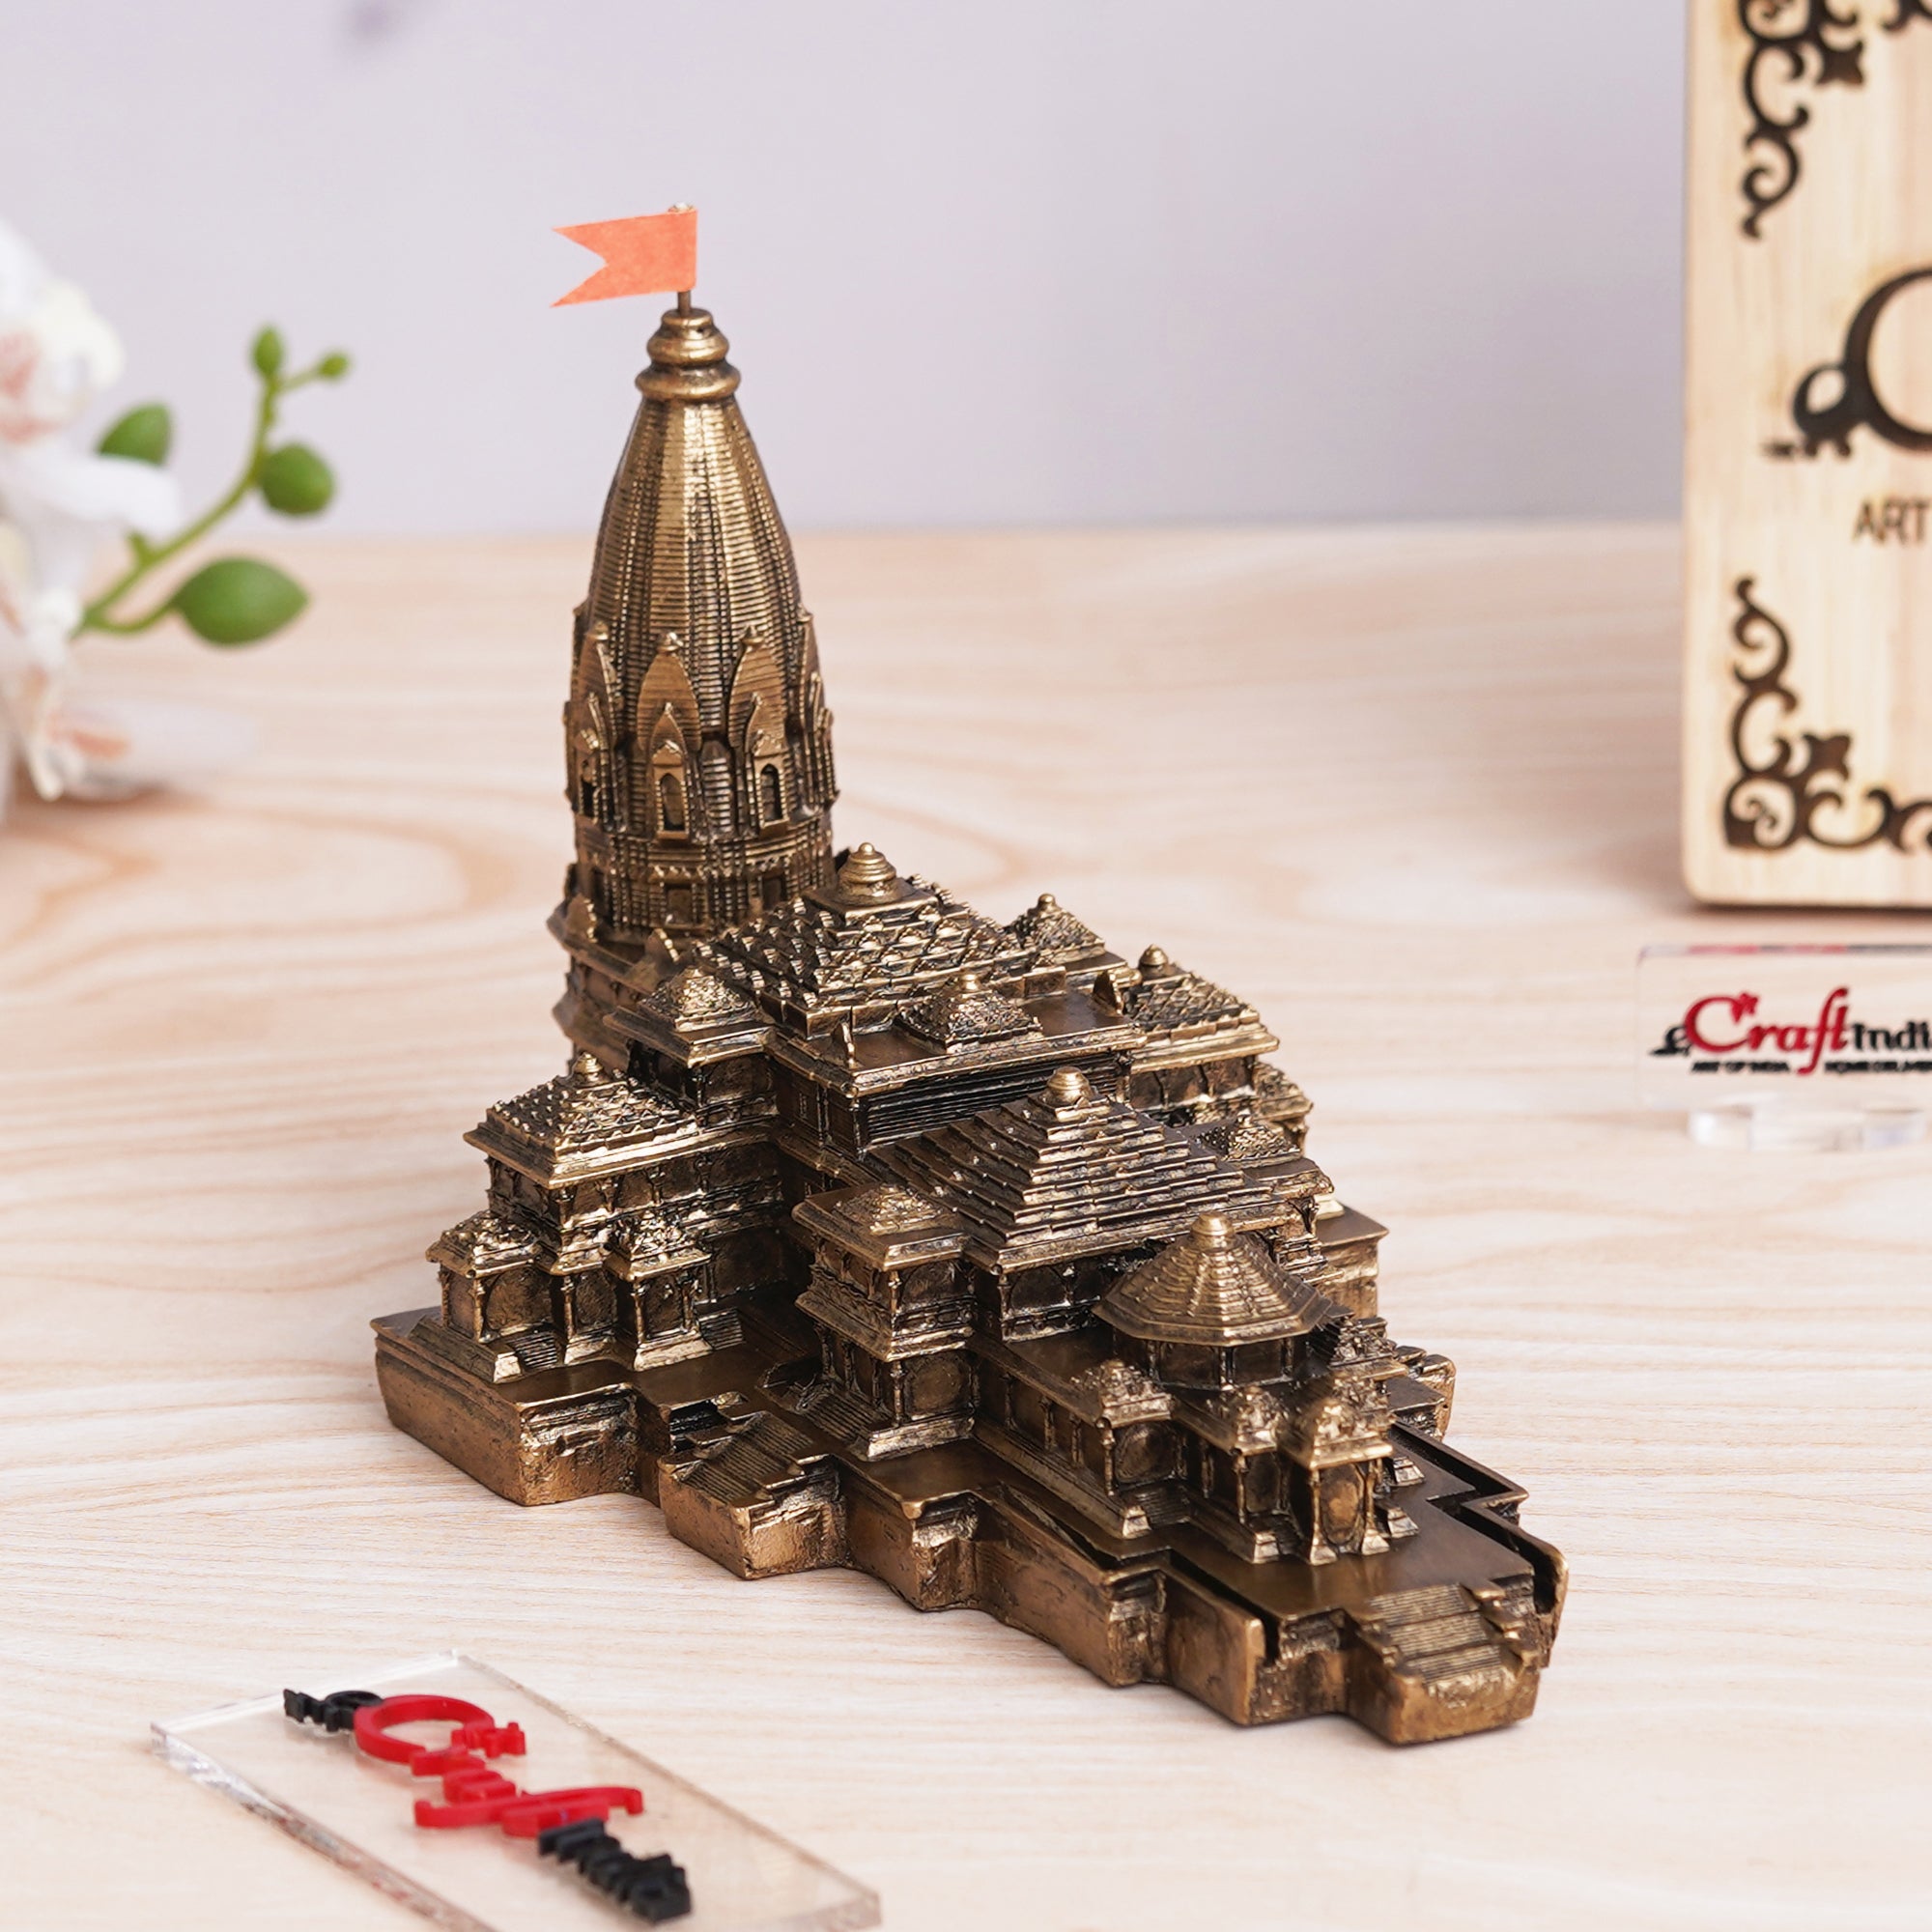 eCraftIndia Ram Mandir Ayodhya Model Authentic Design Temple - Perfect for Home Decor, and Spiritual Gifting (Golden) 4